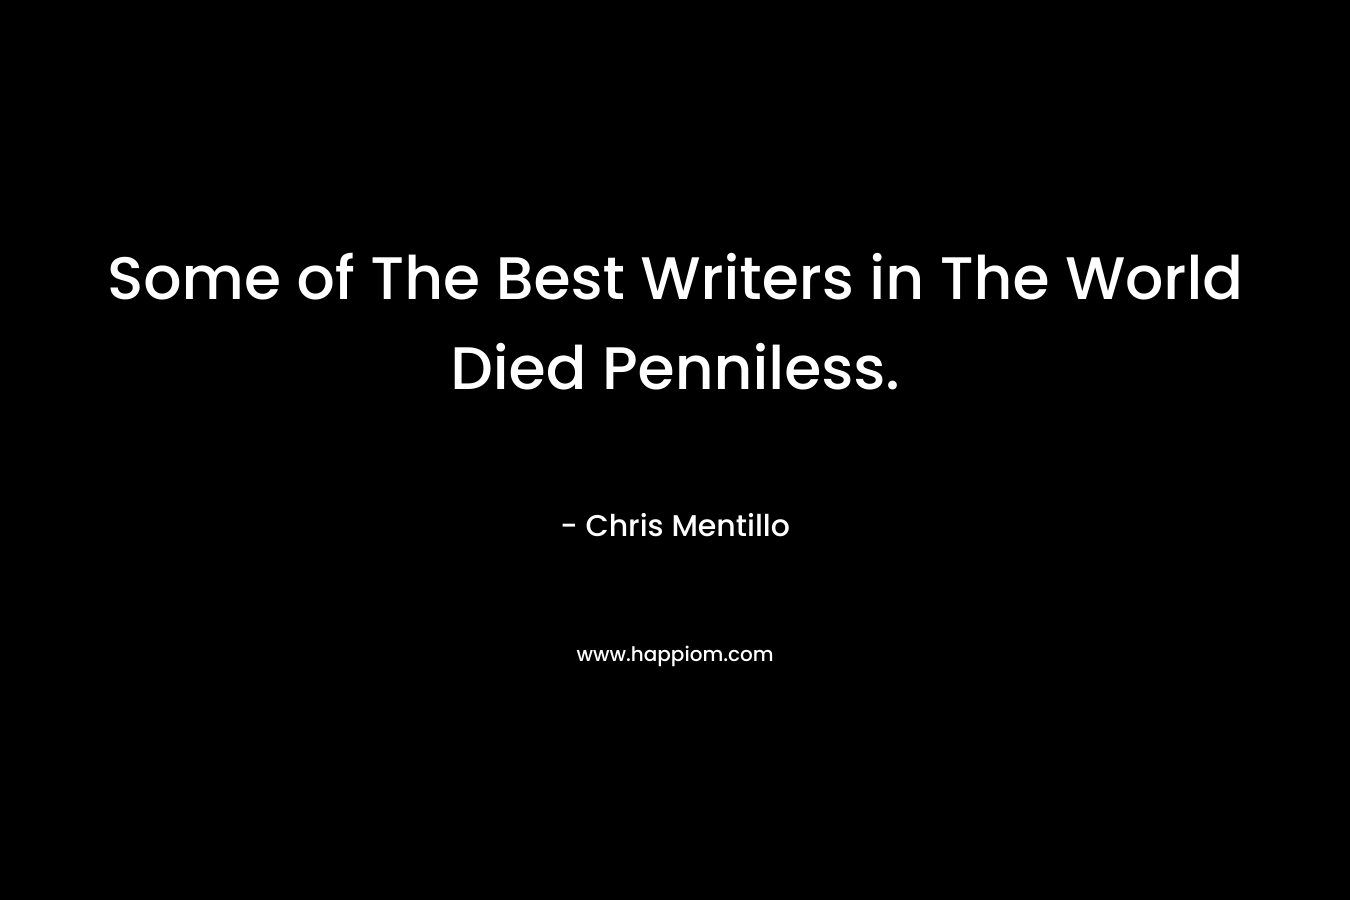 Some of The Best Writers in The World Died Penniless.